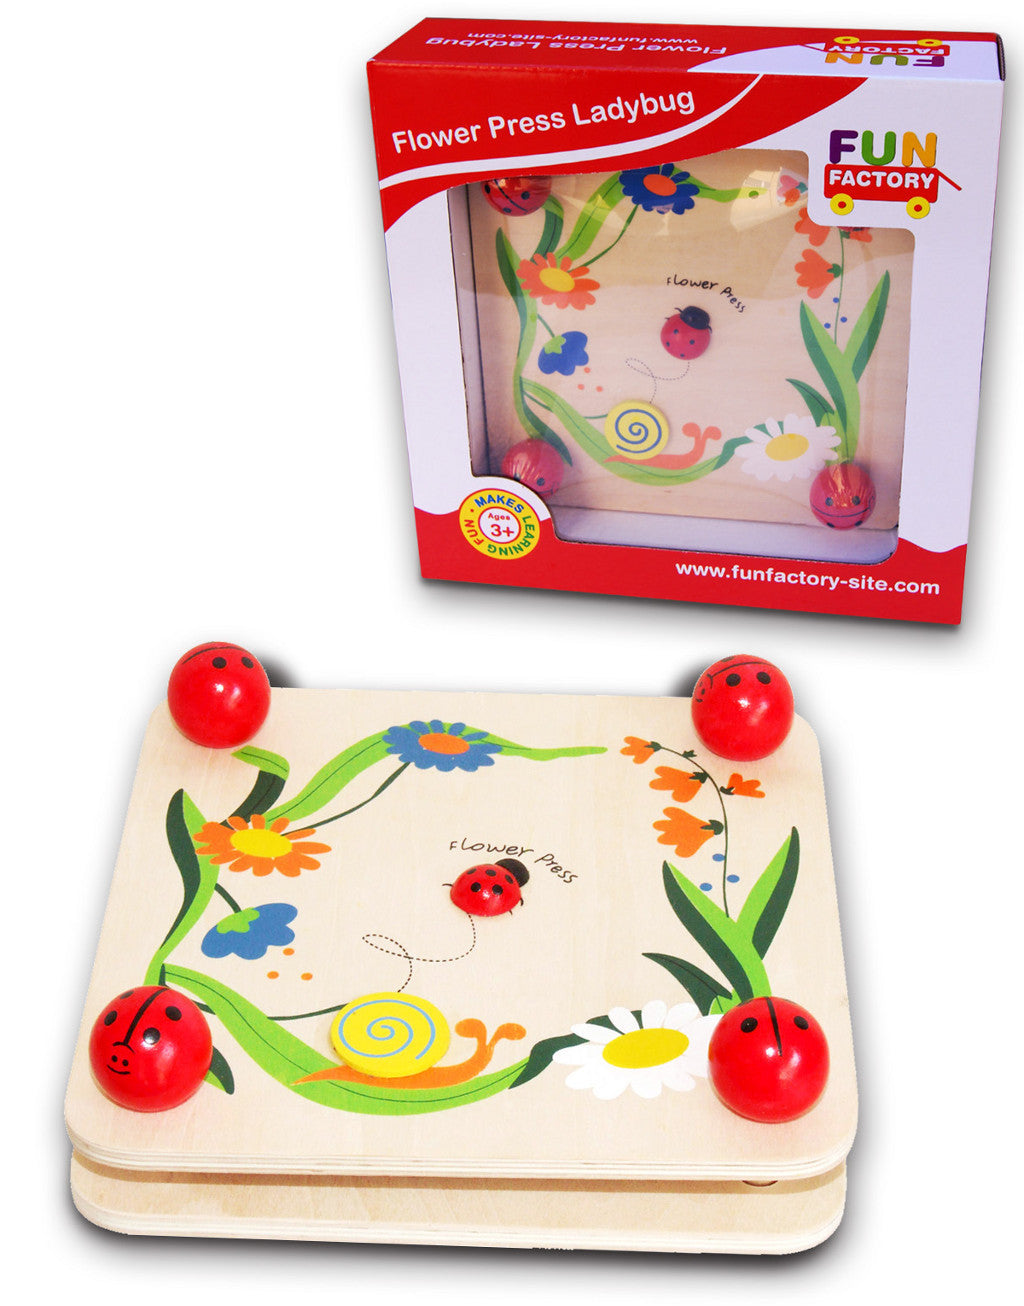 Fun Factory Flower Press Lady Bug - K and K Creative Toys